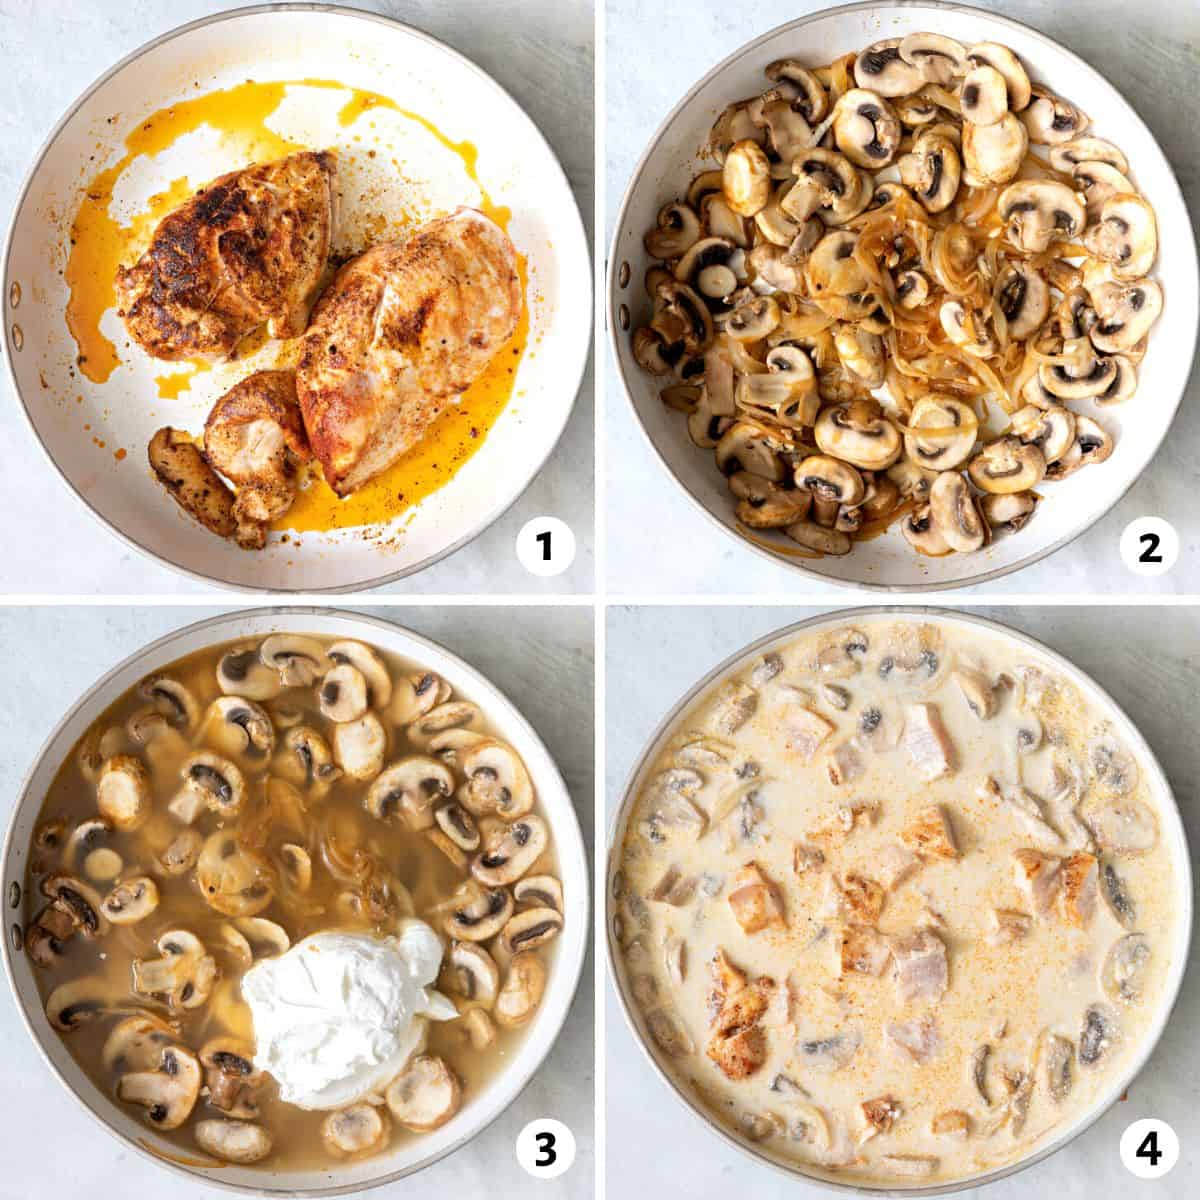 4 image collage cooking recipe in one pan: 1 cooking chicken, 2 cooking mushrooms and onions, 3 adding broth and sour cream, and 4 mixing together.